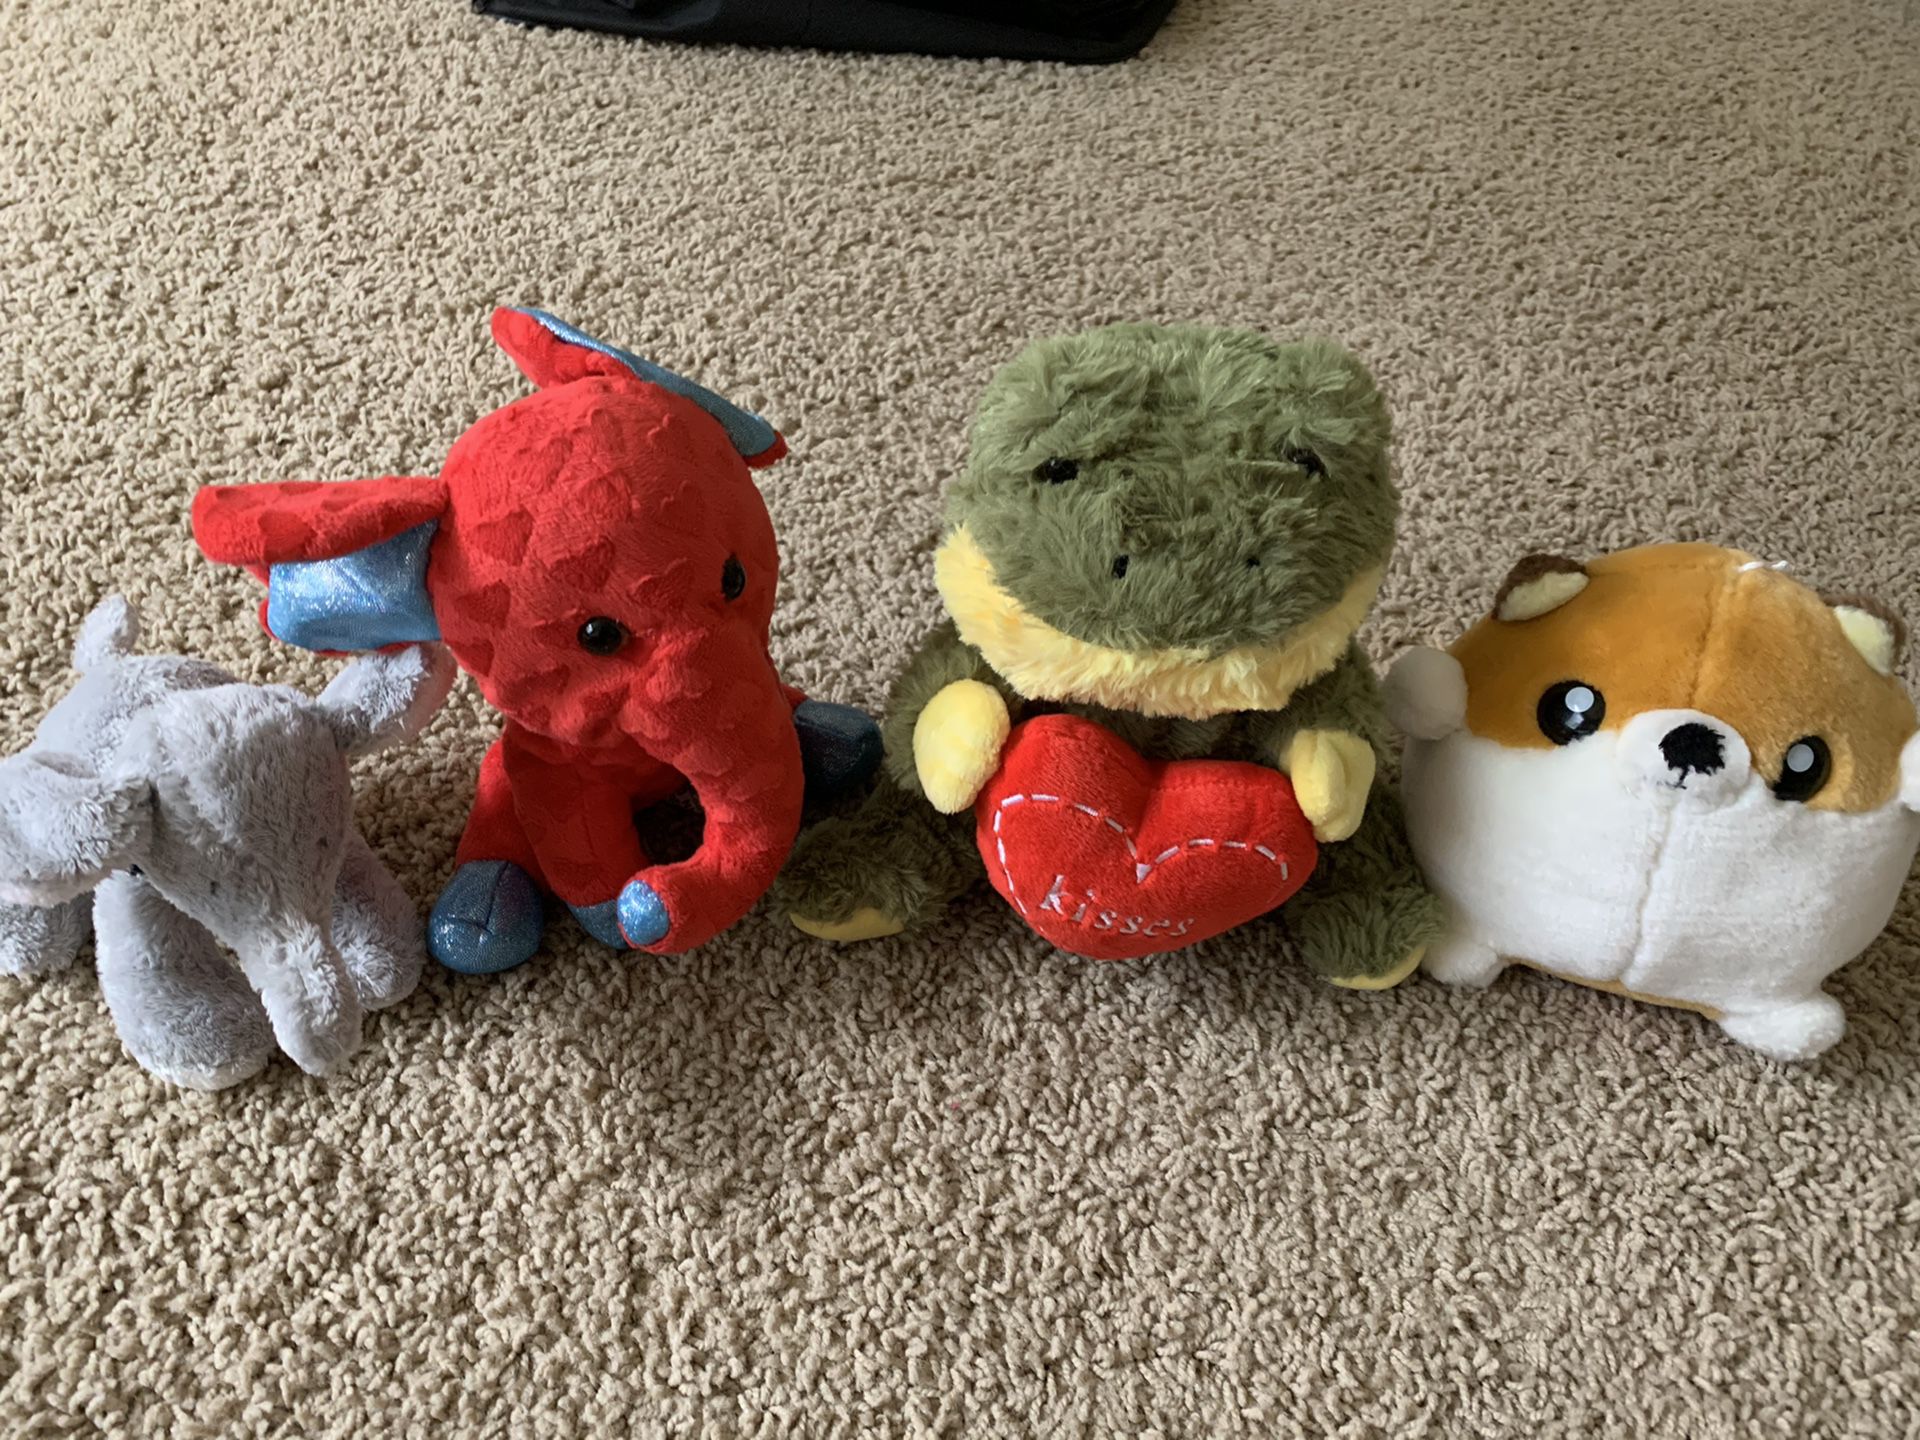 Assorted small stuffed animal toys